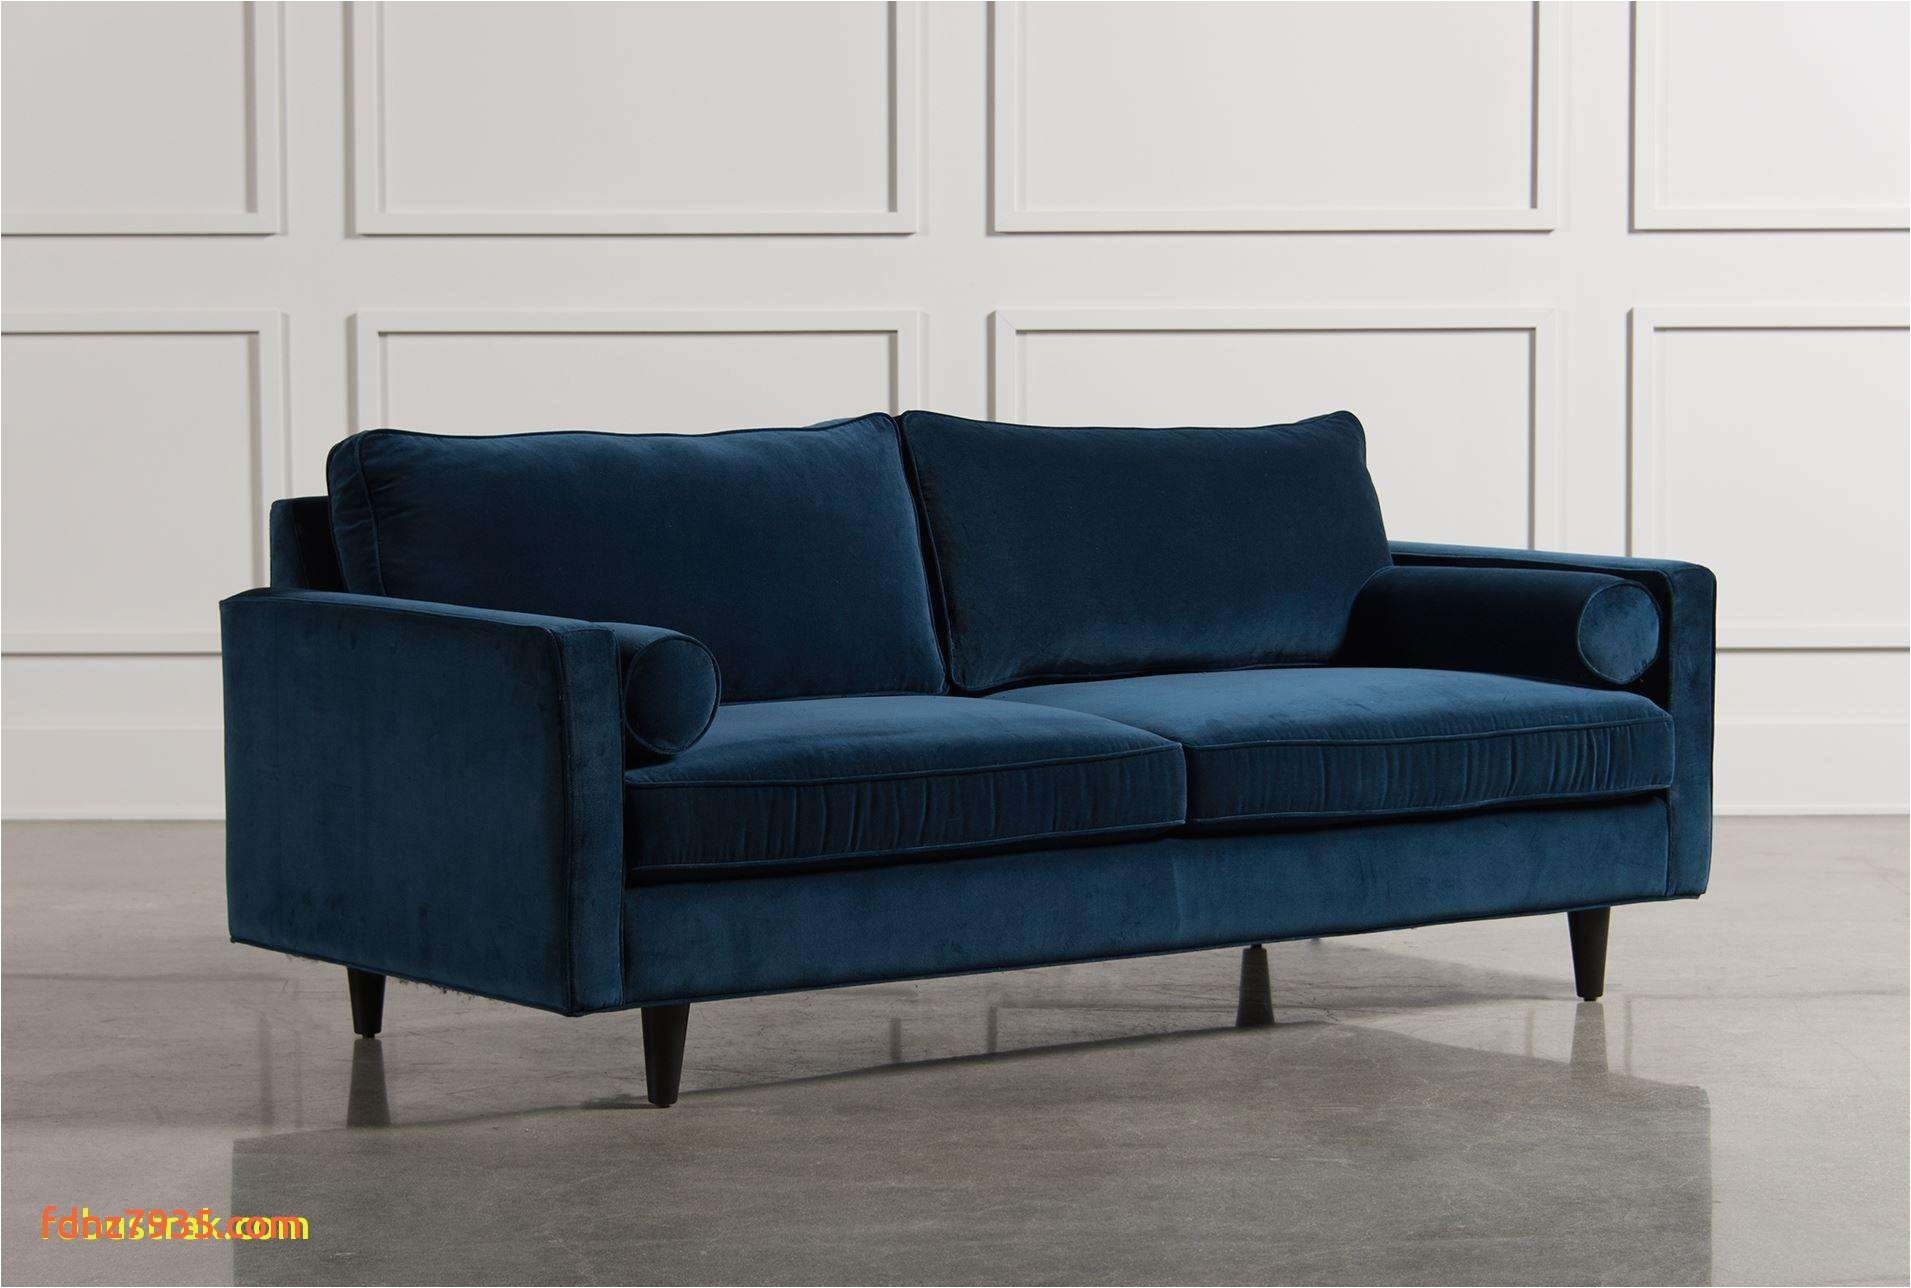 full size of furniture leather sectional couch unique furniture leather loveseats elegant navy loveseat 0d size